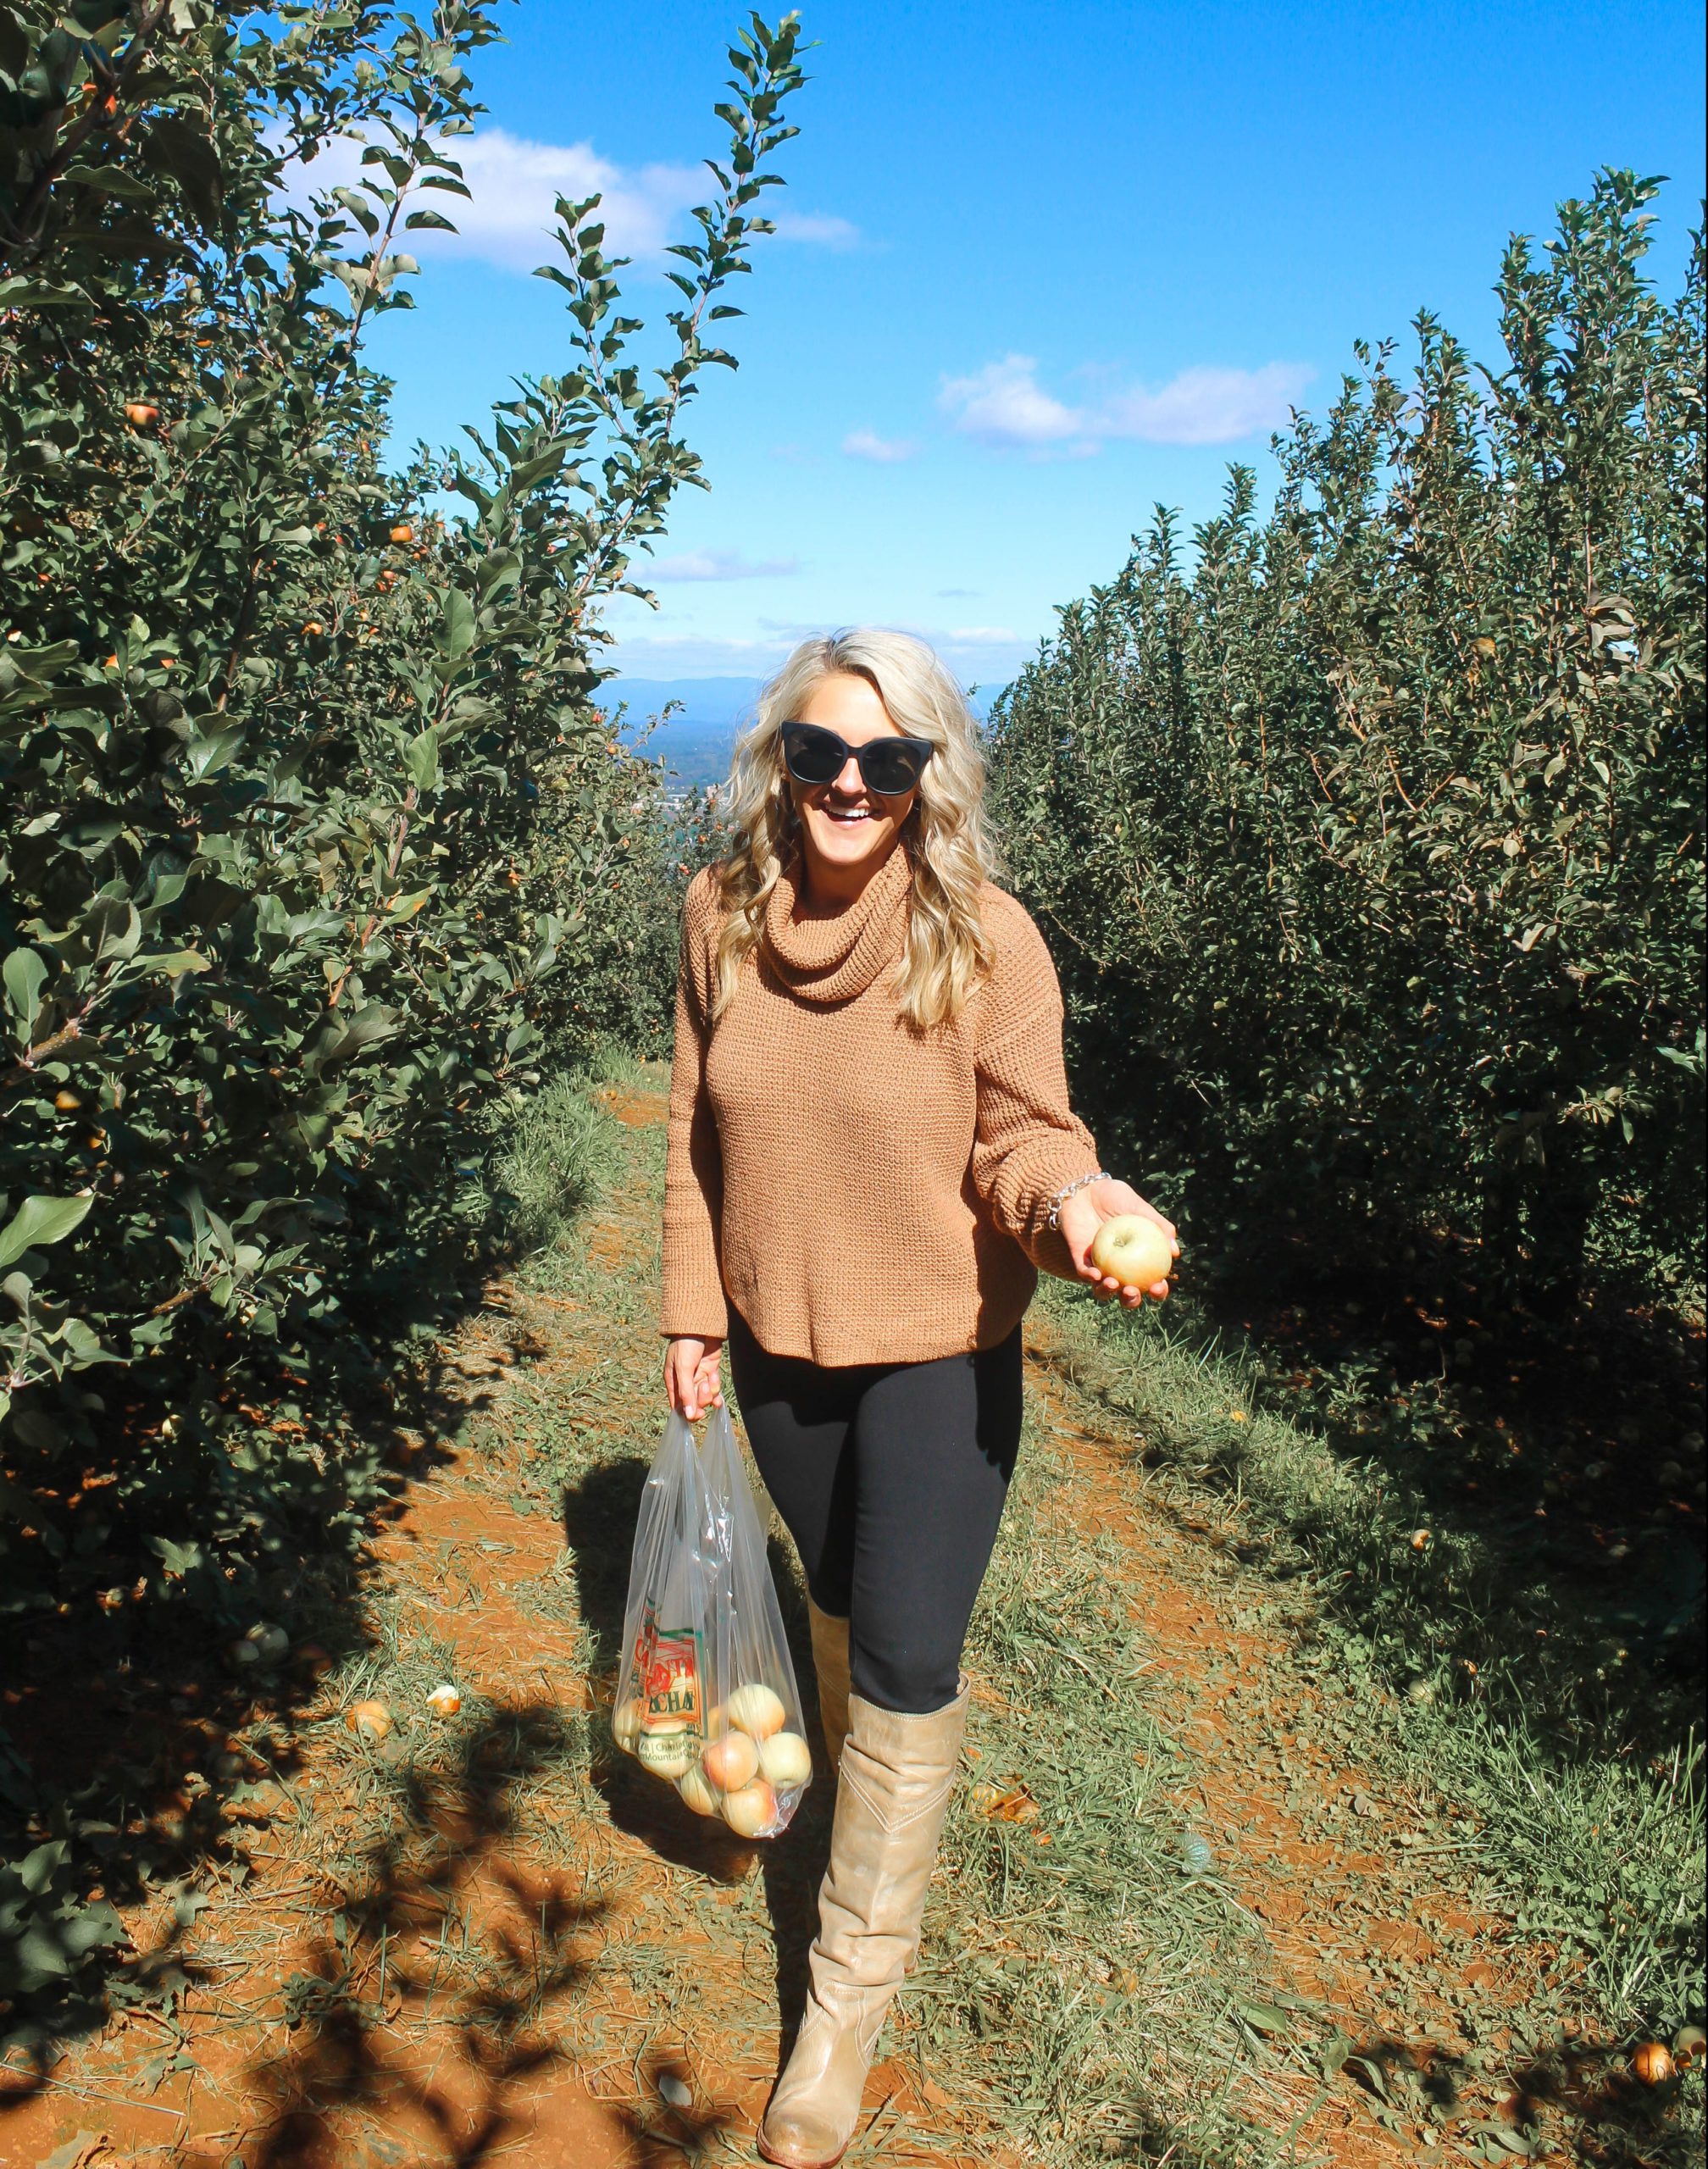 5 Quick Tips for Apple Picking at Carter Mountain Orchard